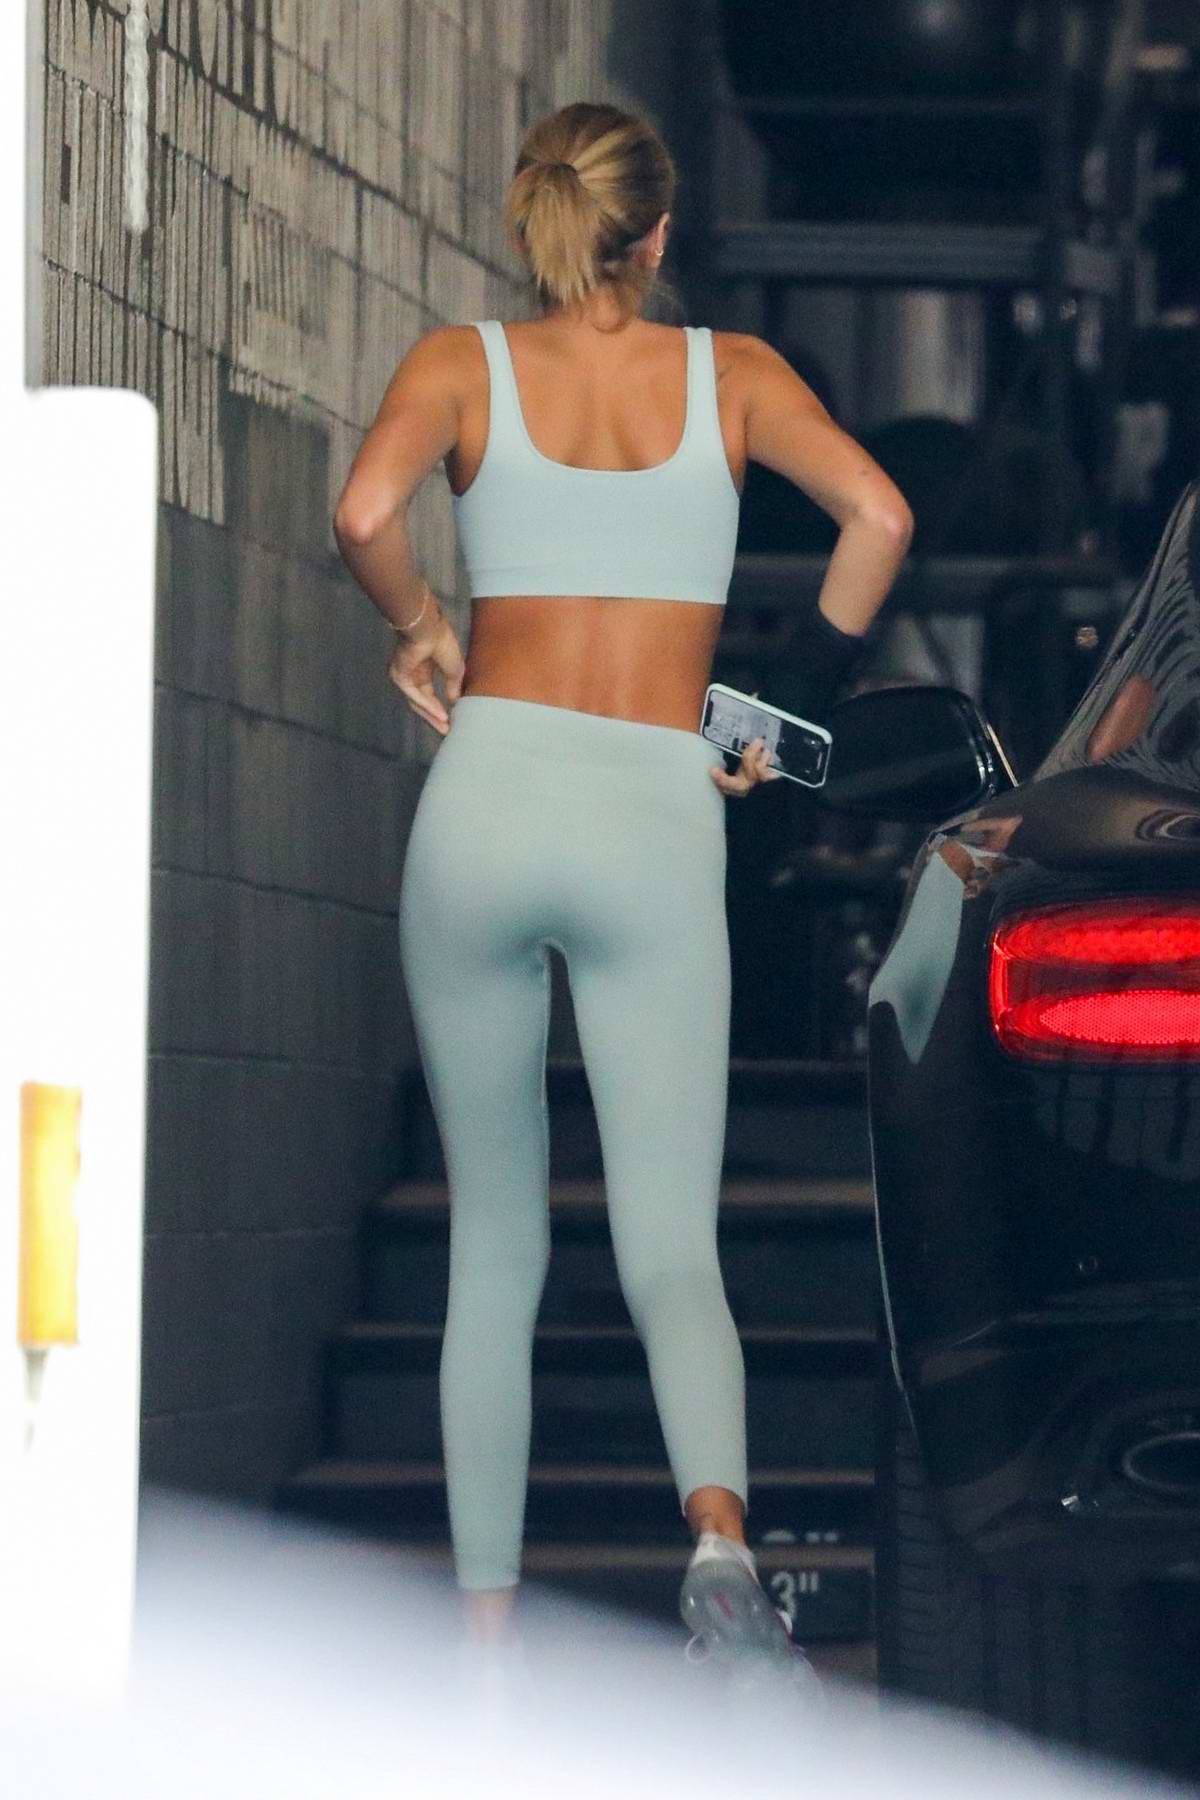 https://www.celebsfirst.com/wp-content/uploads/2020/06/kaia-gerber-shows-off-her-stunning-figure-in-a-crop-top-and-leggings-as-arrives-at-the-dogpound-gym-in-los-angeles-290620_9.jpg